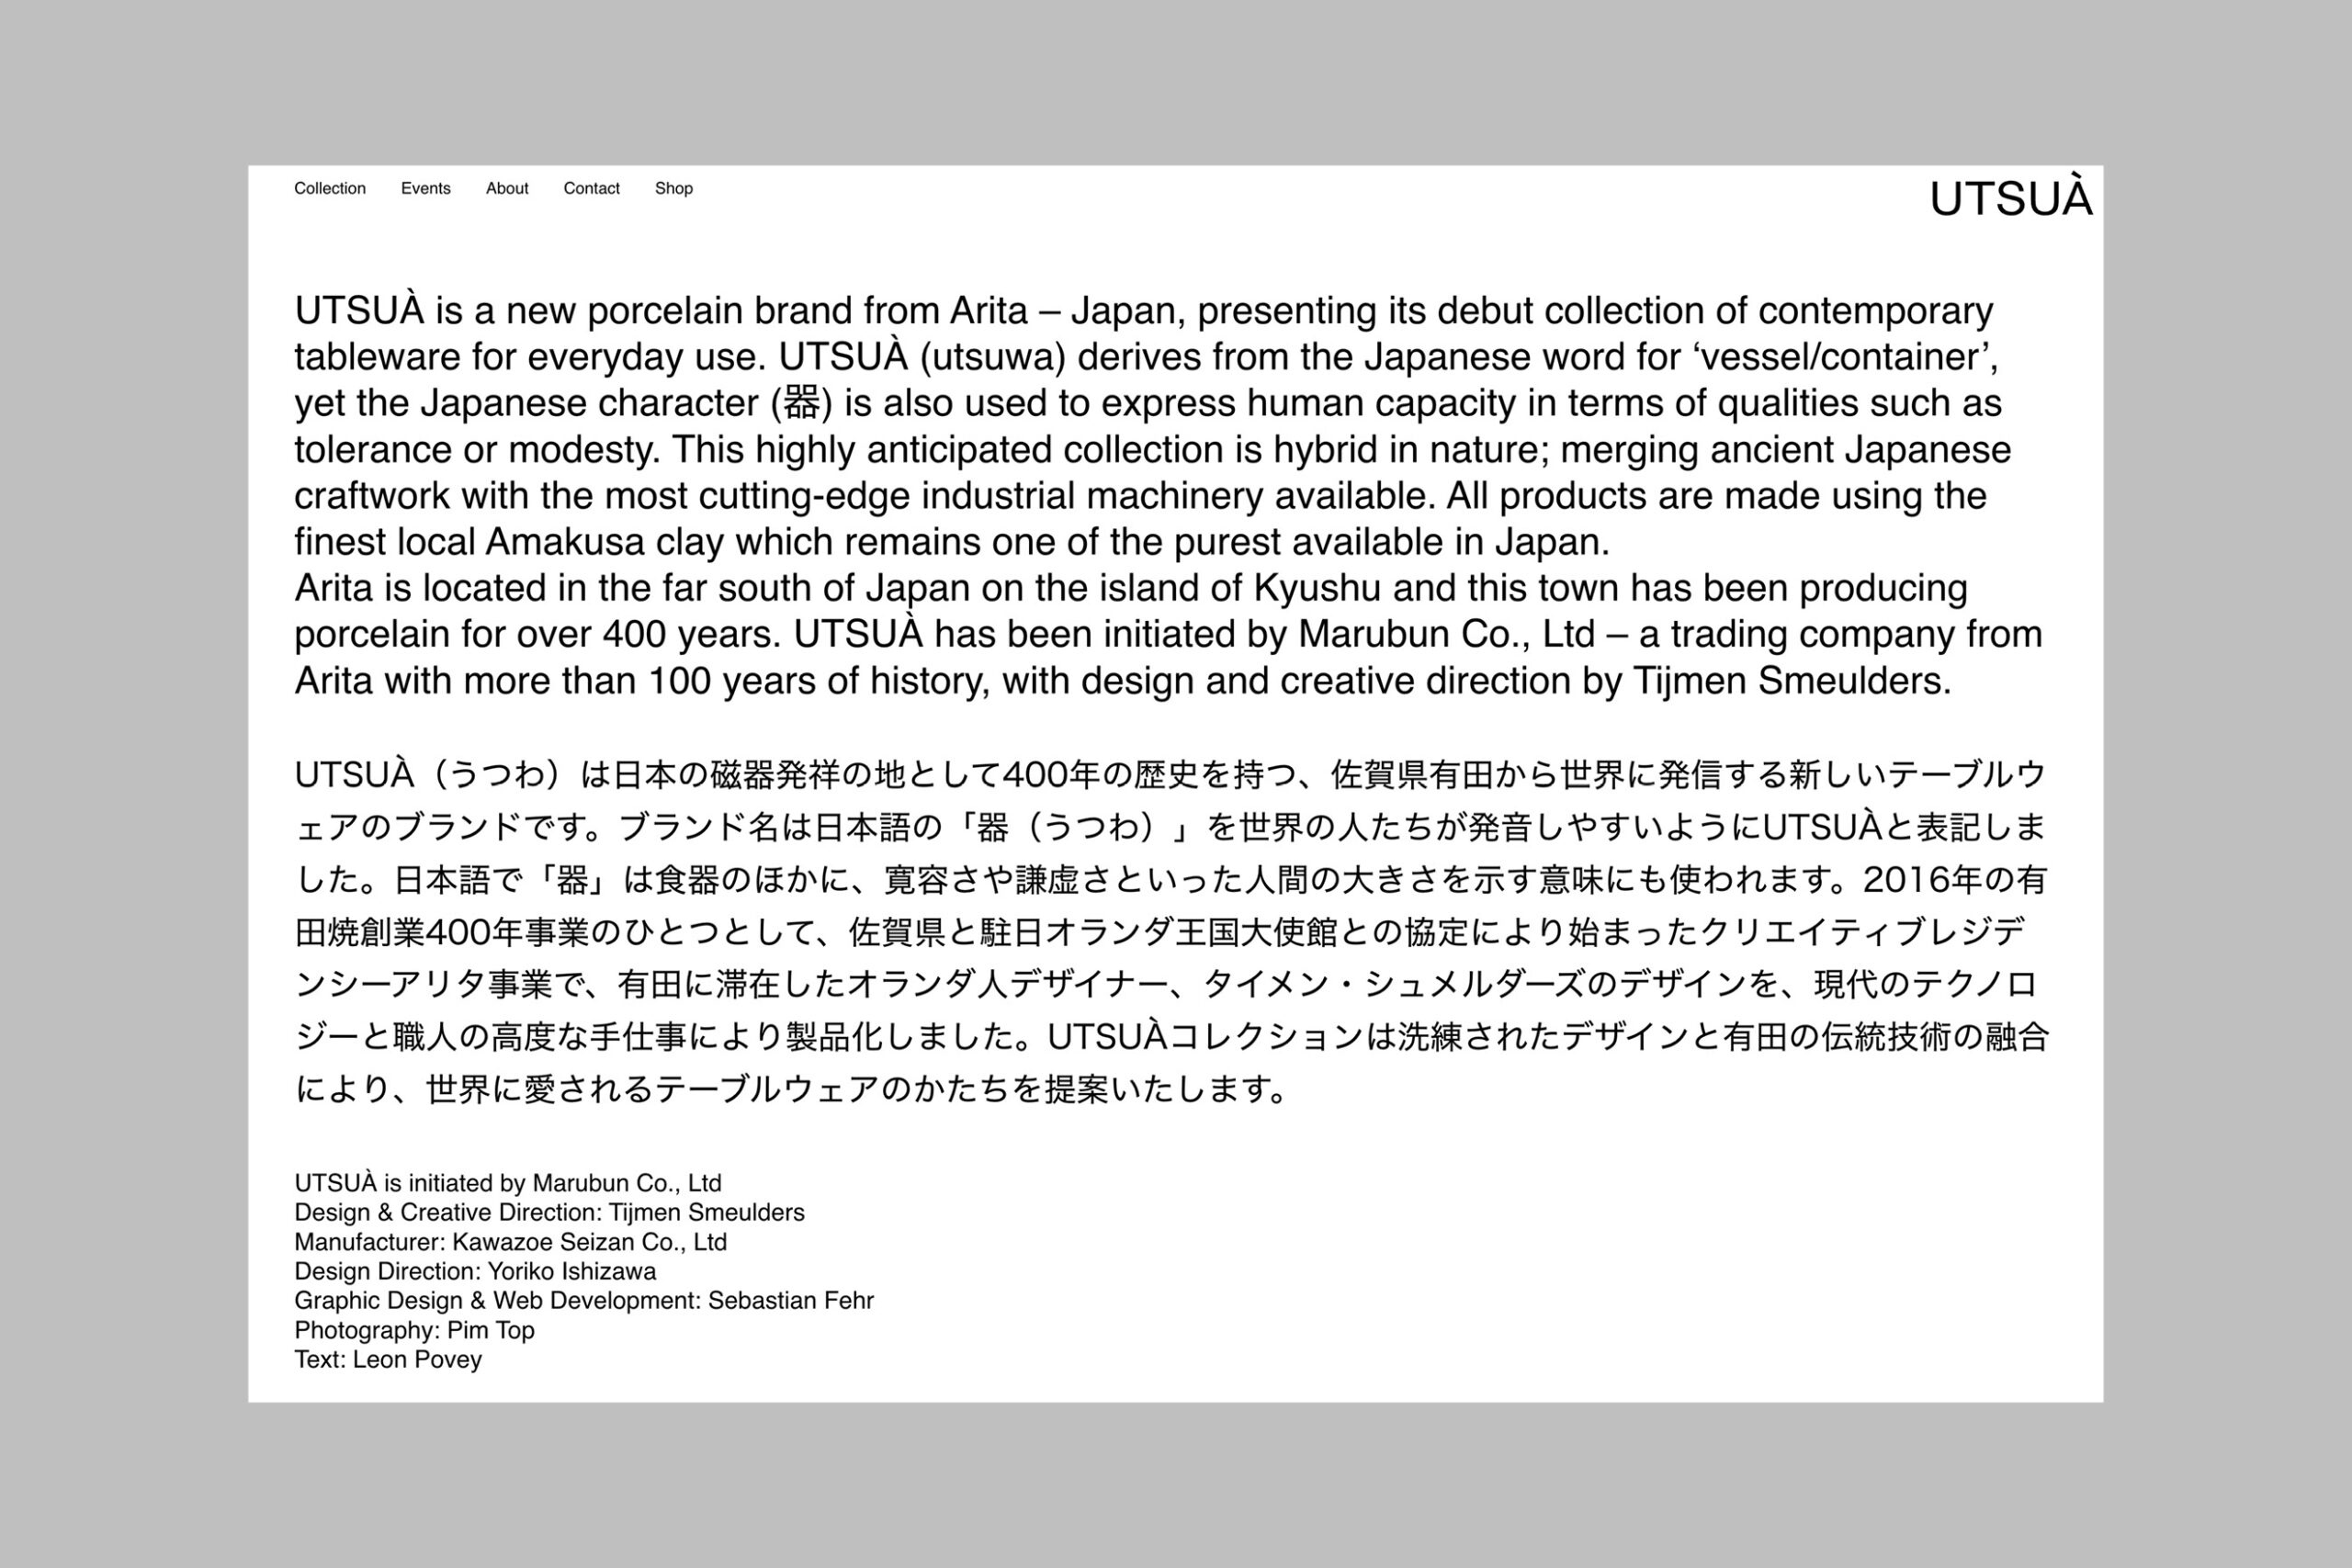 Utsua web layout with brand story set in big letters